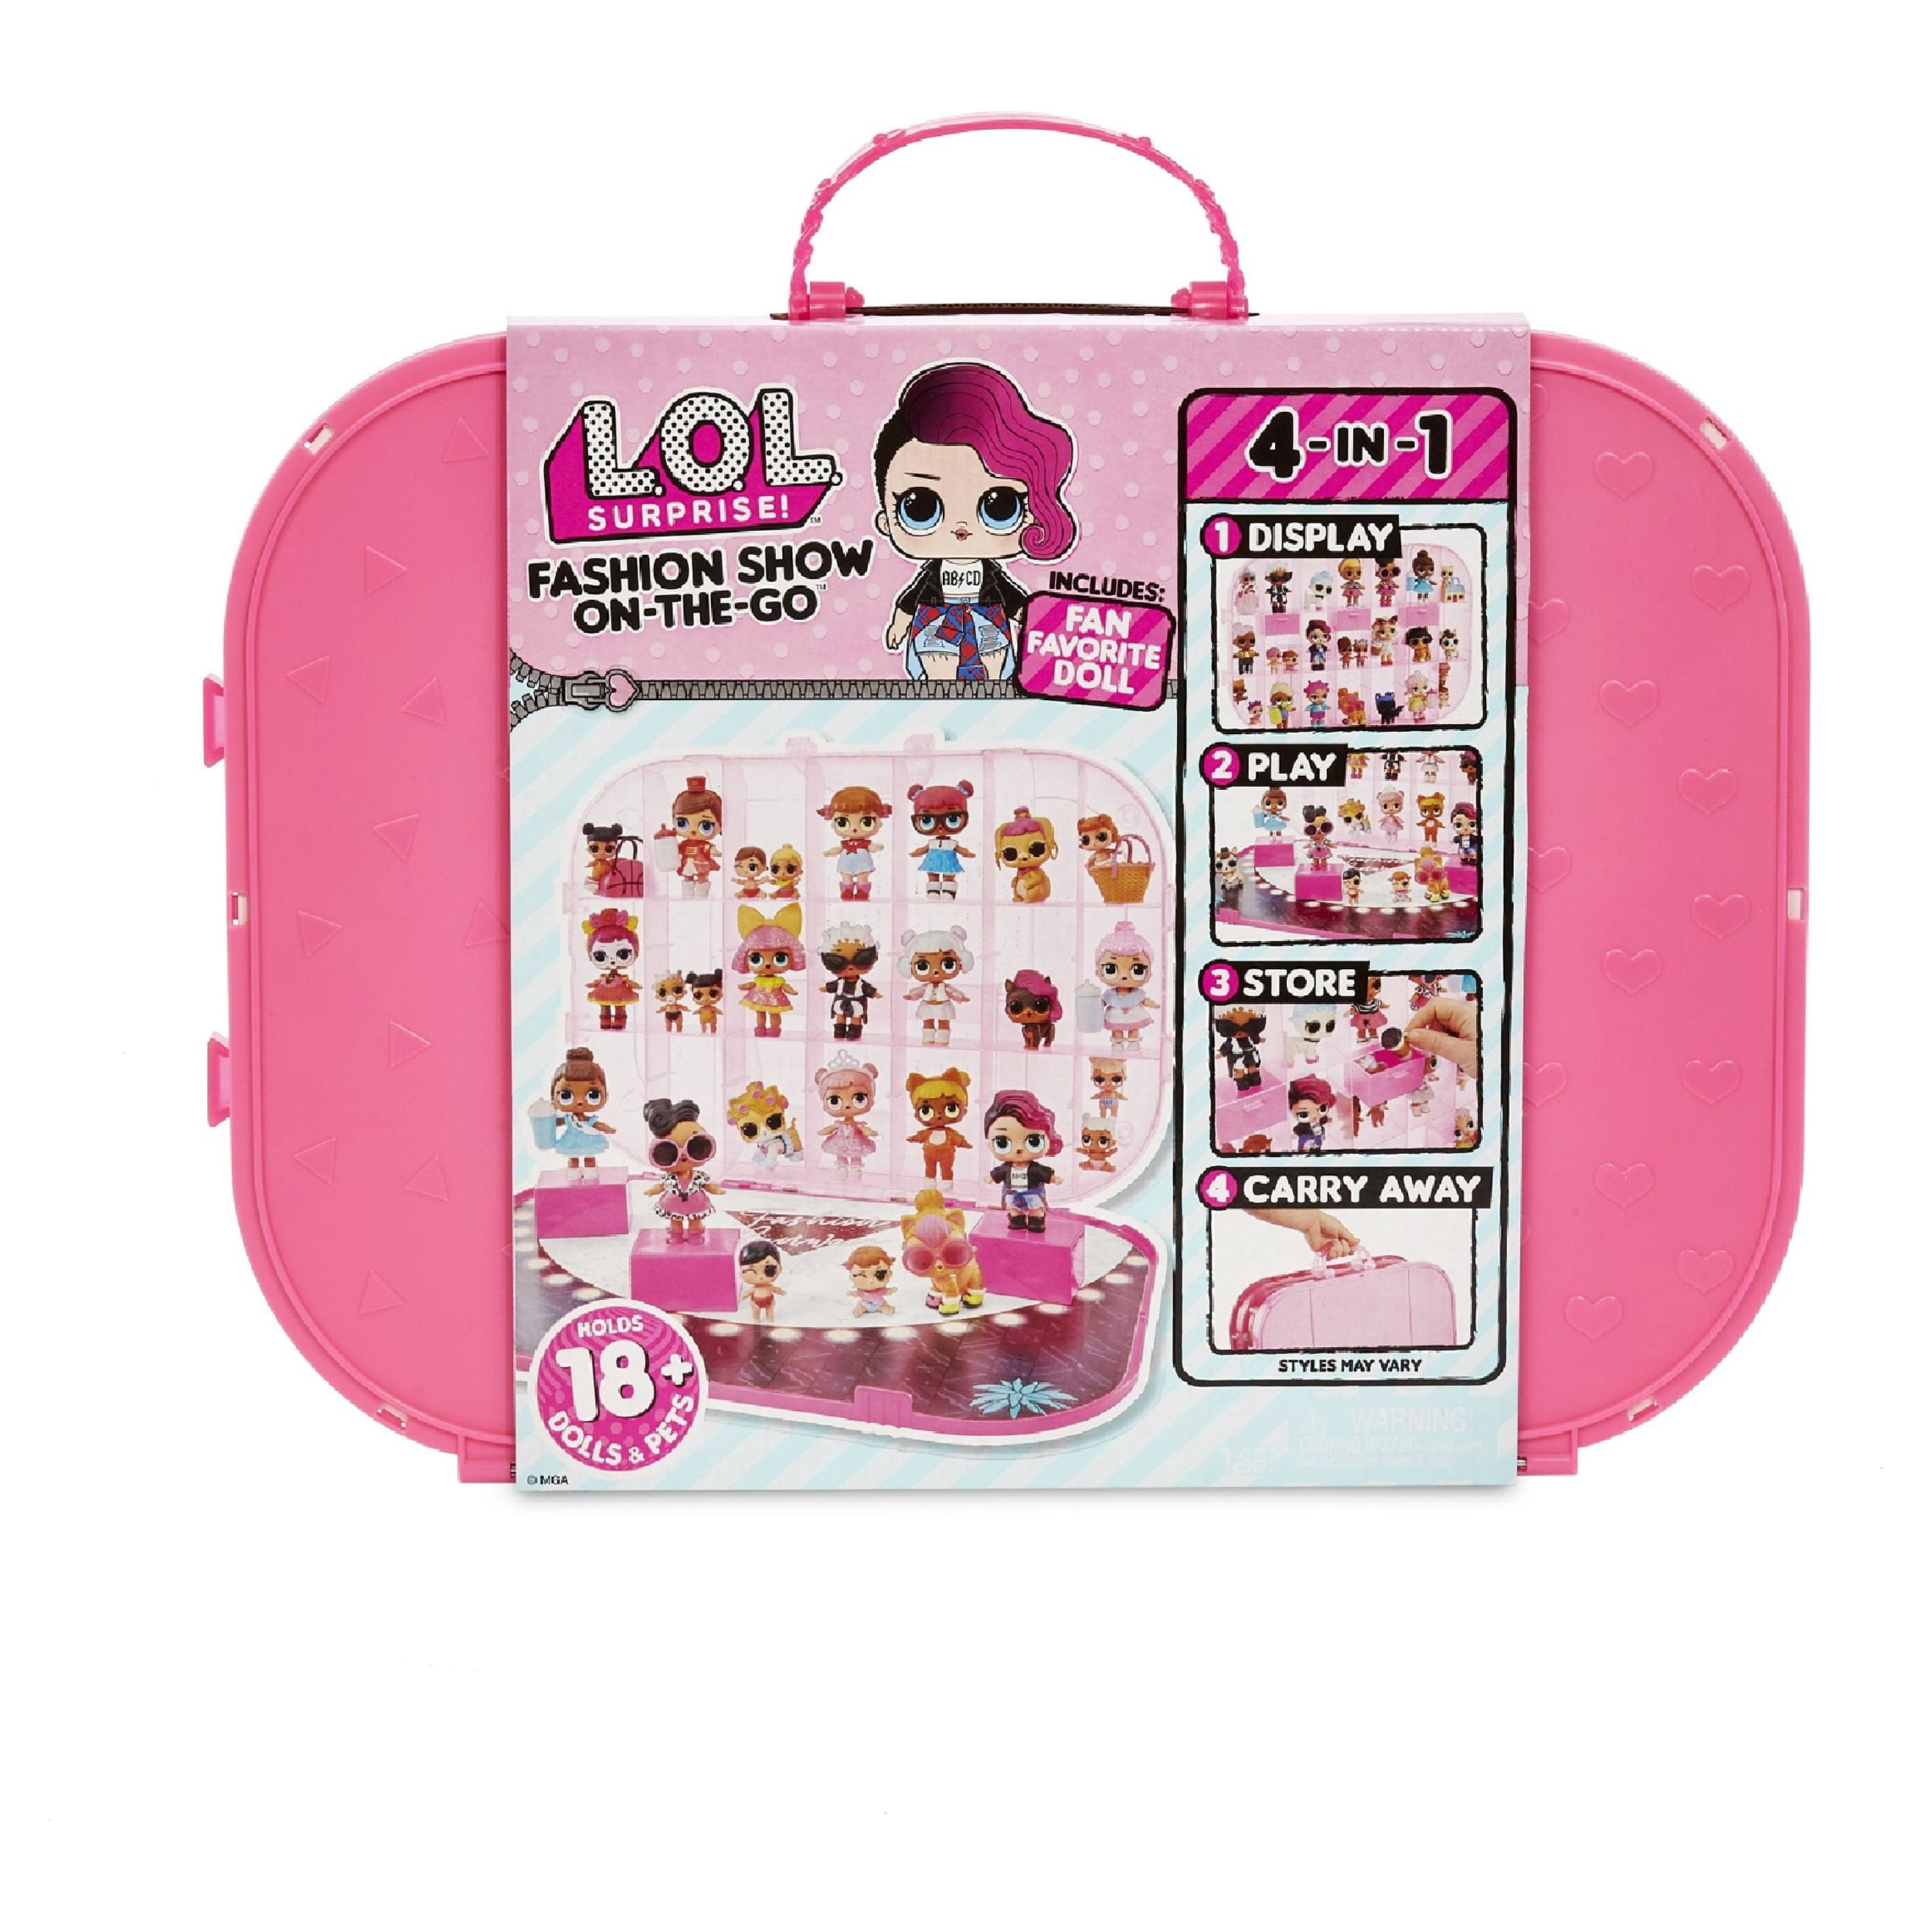  Imagination Gaming LOL Surprise Peek-A-Boo Runway Game, Secret  Doll Reveals on Adorable Pink Runway, Includes Bonus Ruckus Game & Digital  Party Game, Ages 5+ : Toys & Games